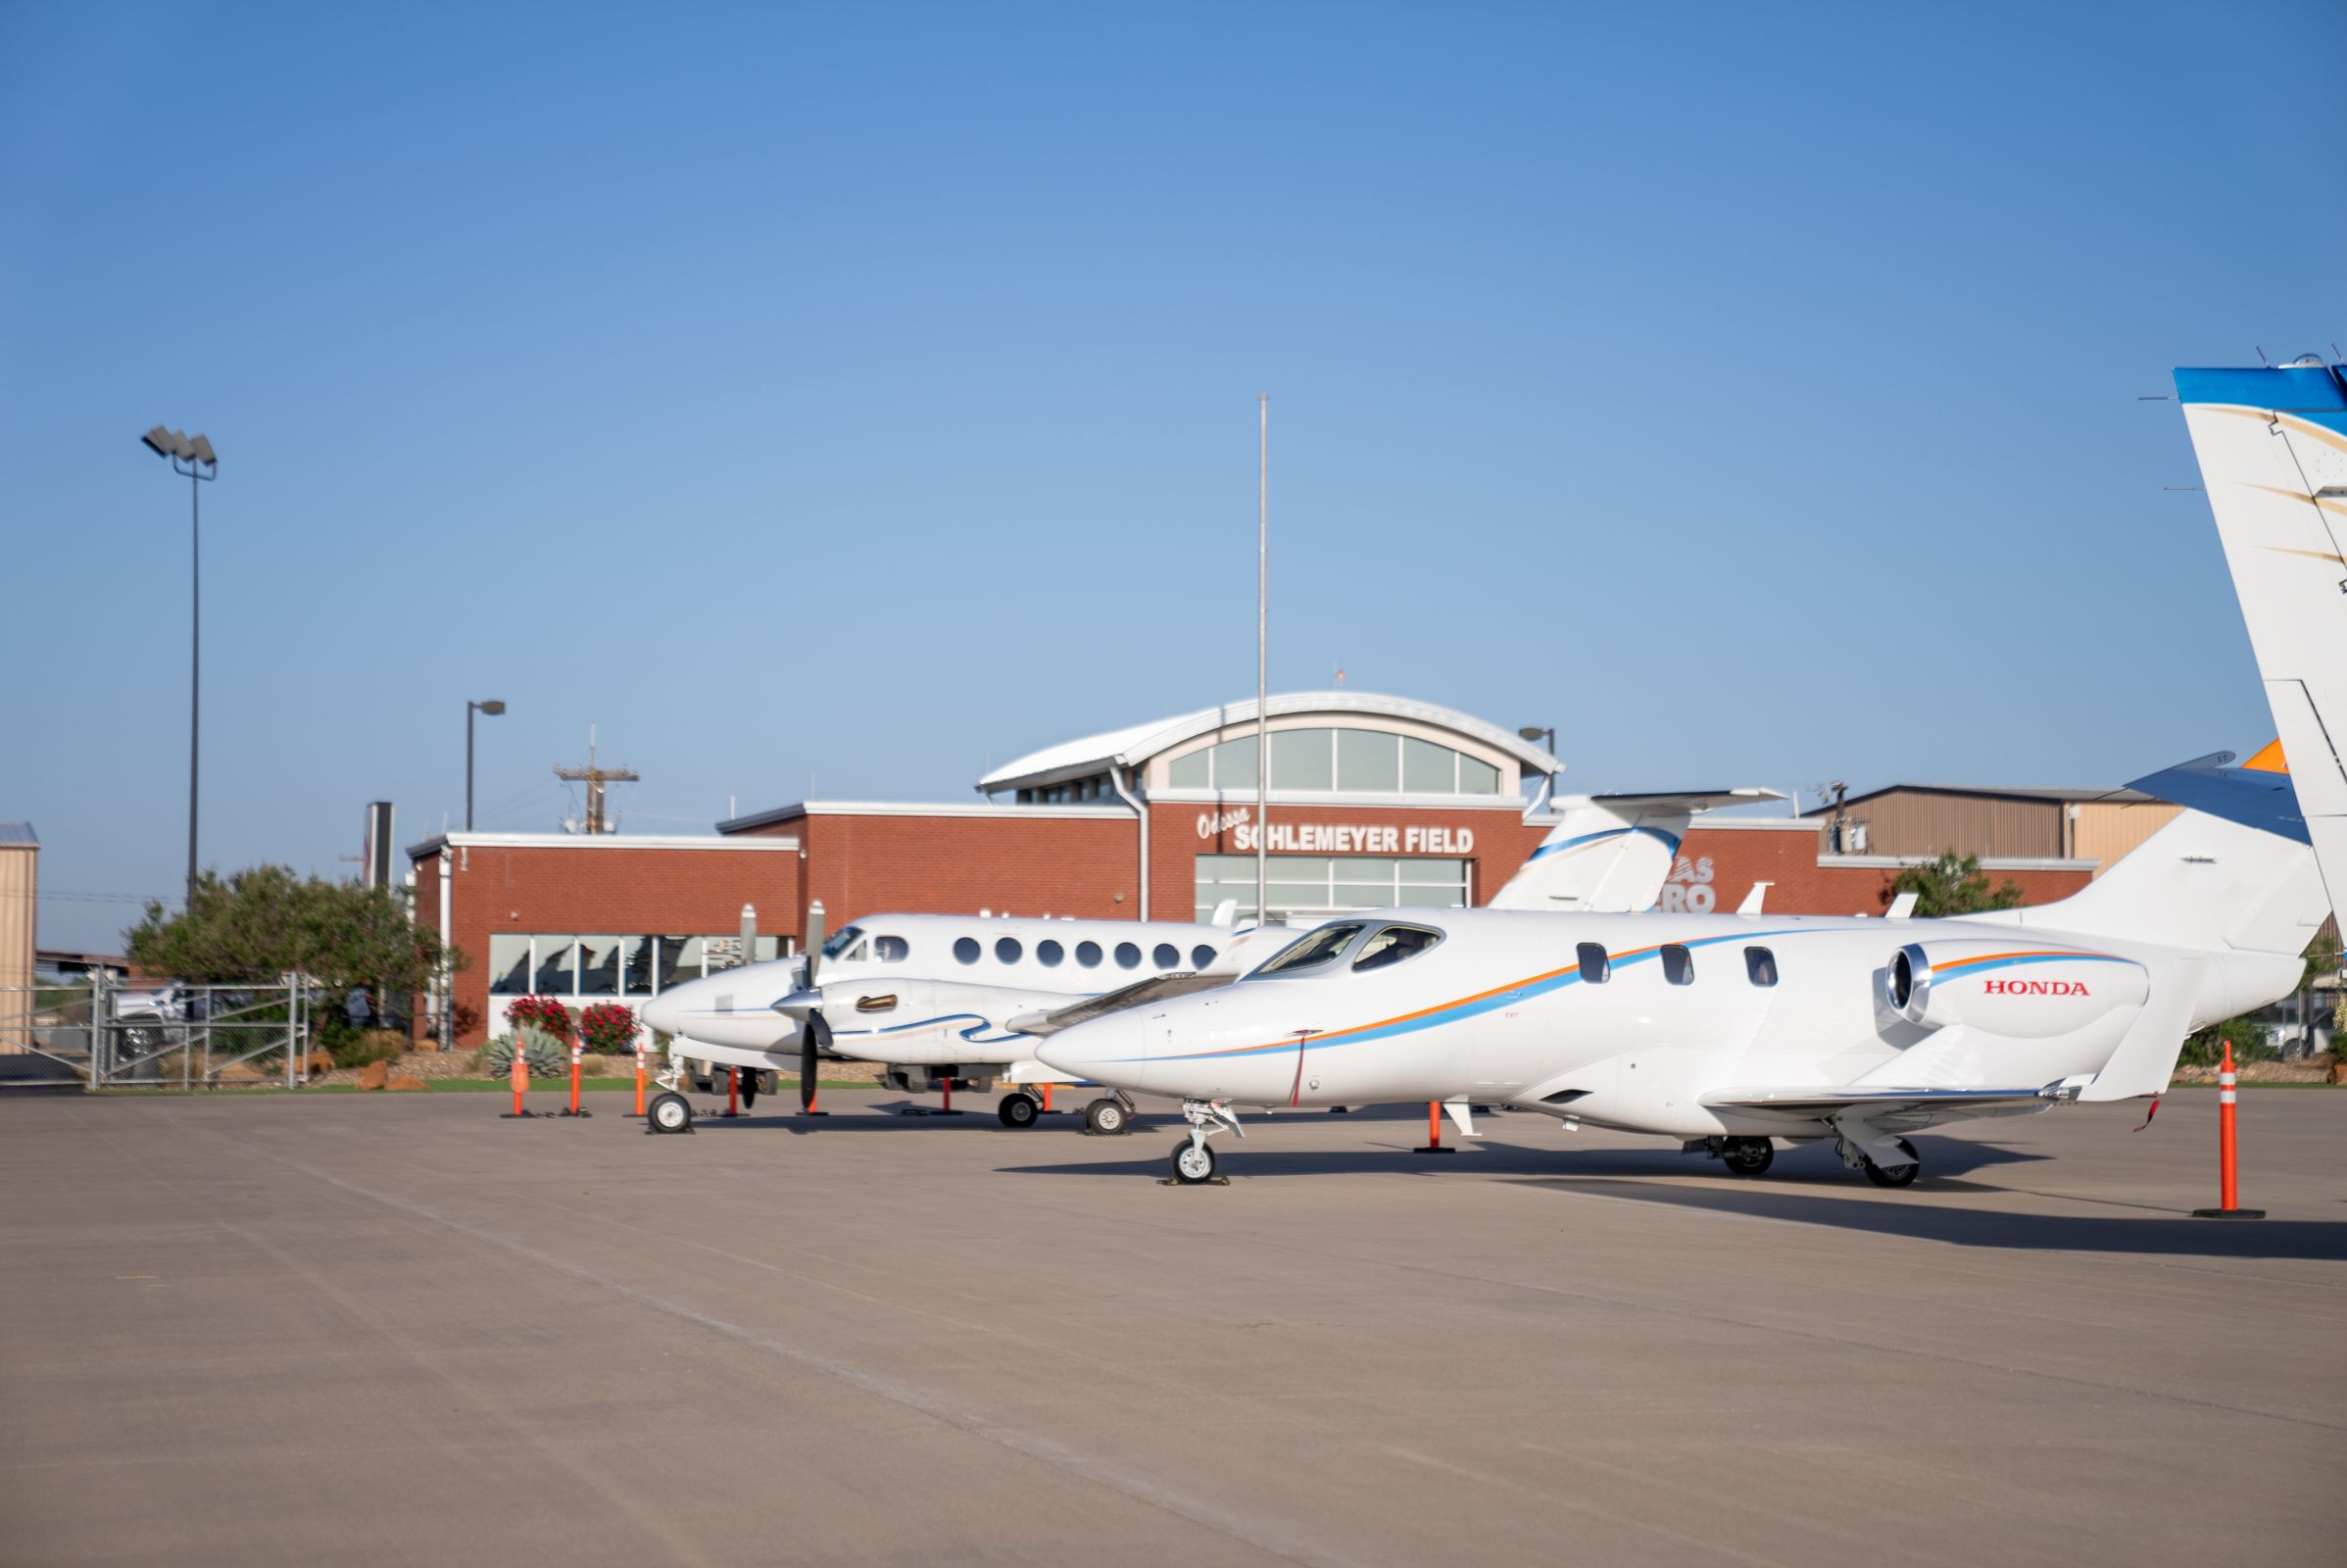 Planning for future of Odessa-Schlemeyer Field Airport Photo